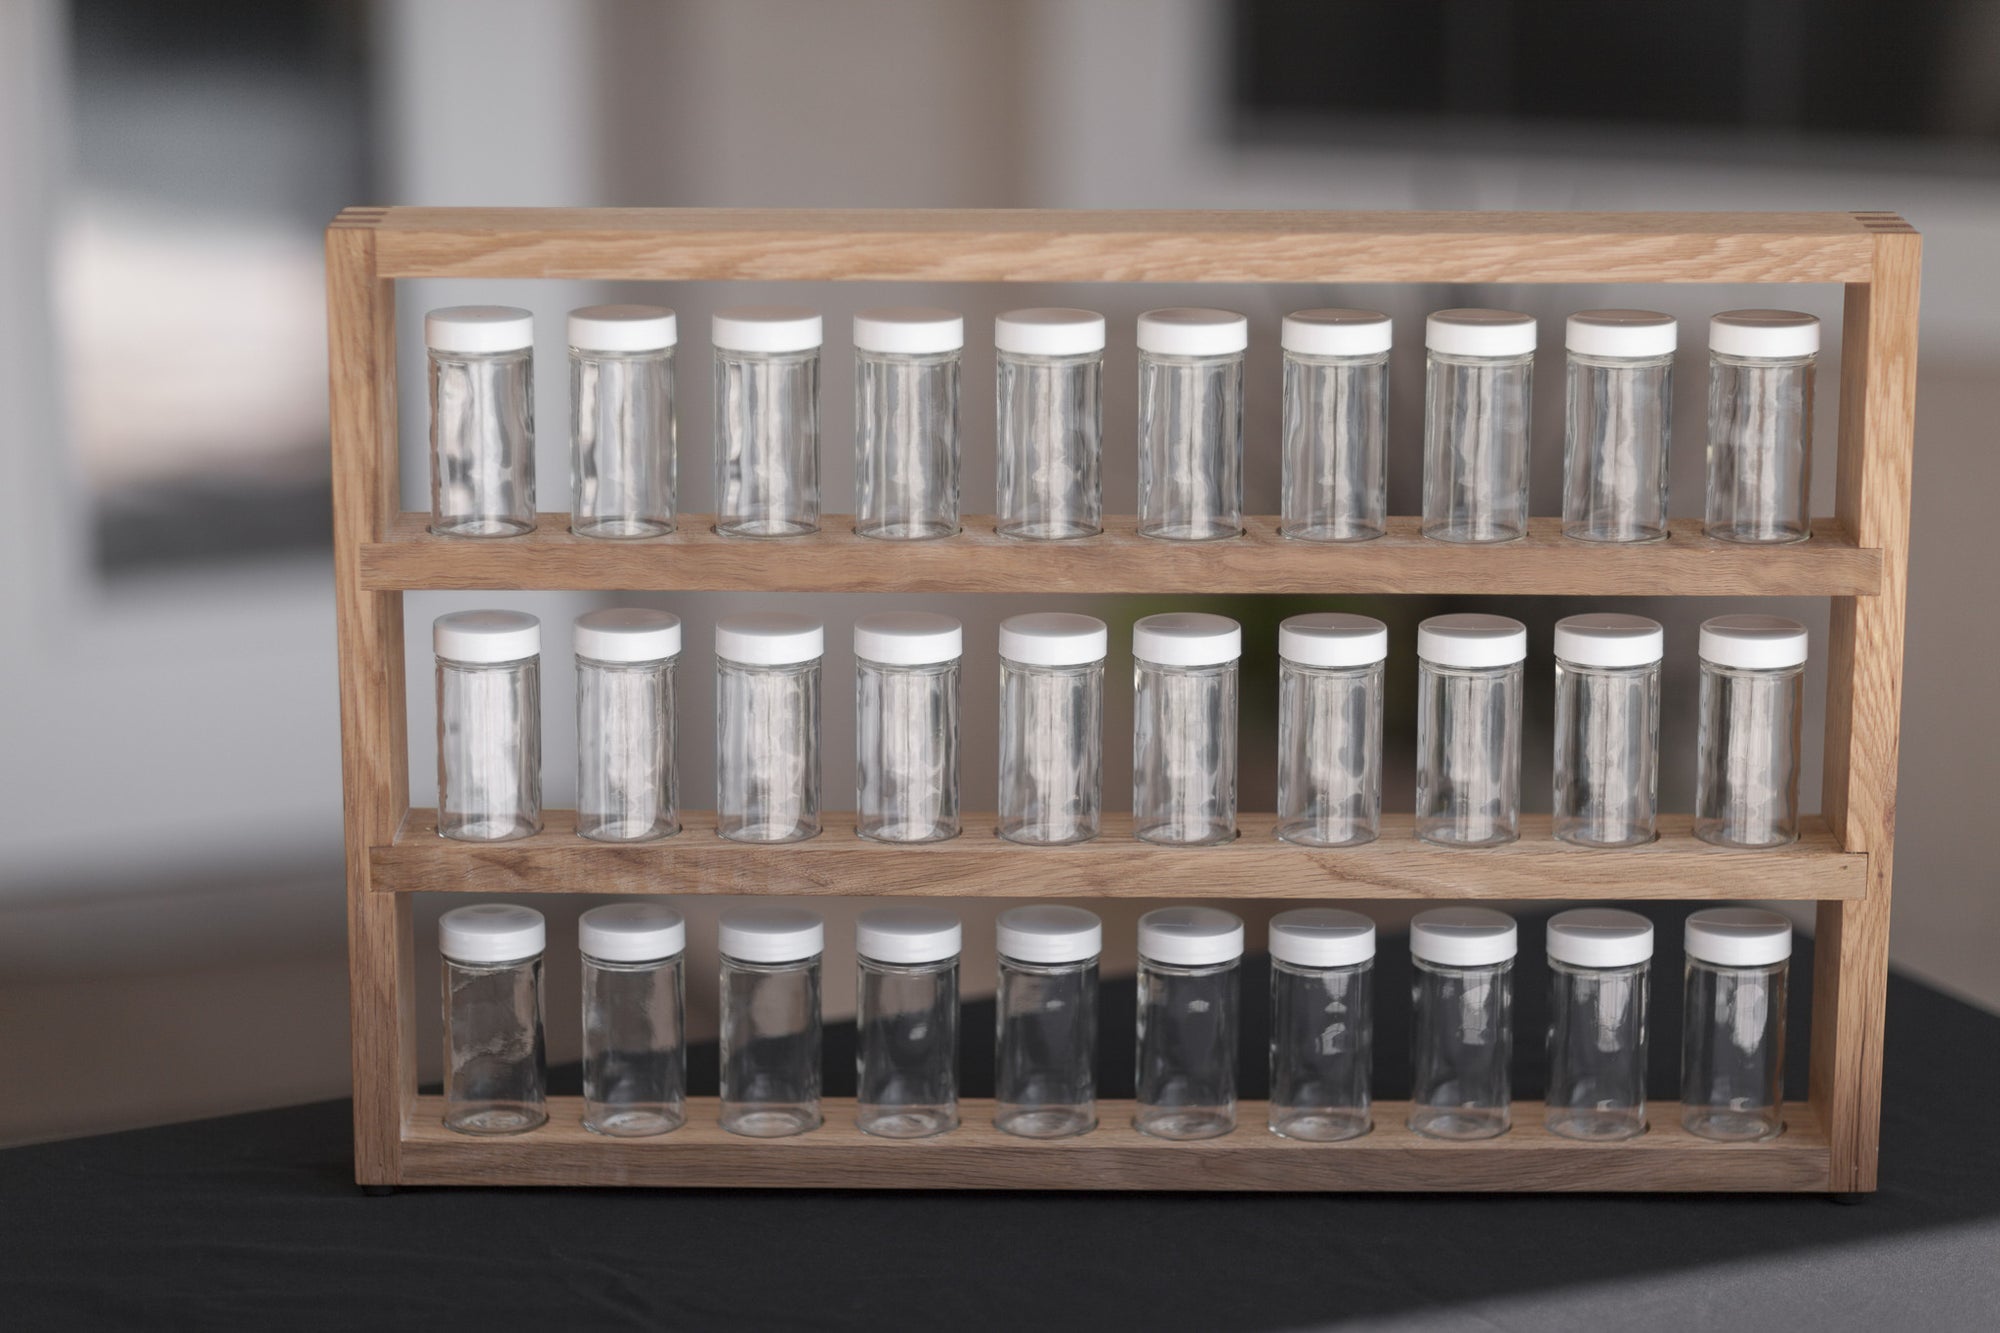 HappyHome Spice Rack with Jars, Funnel, Labels, & Pen - Wall Mount